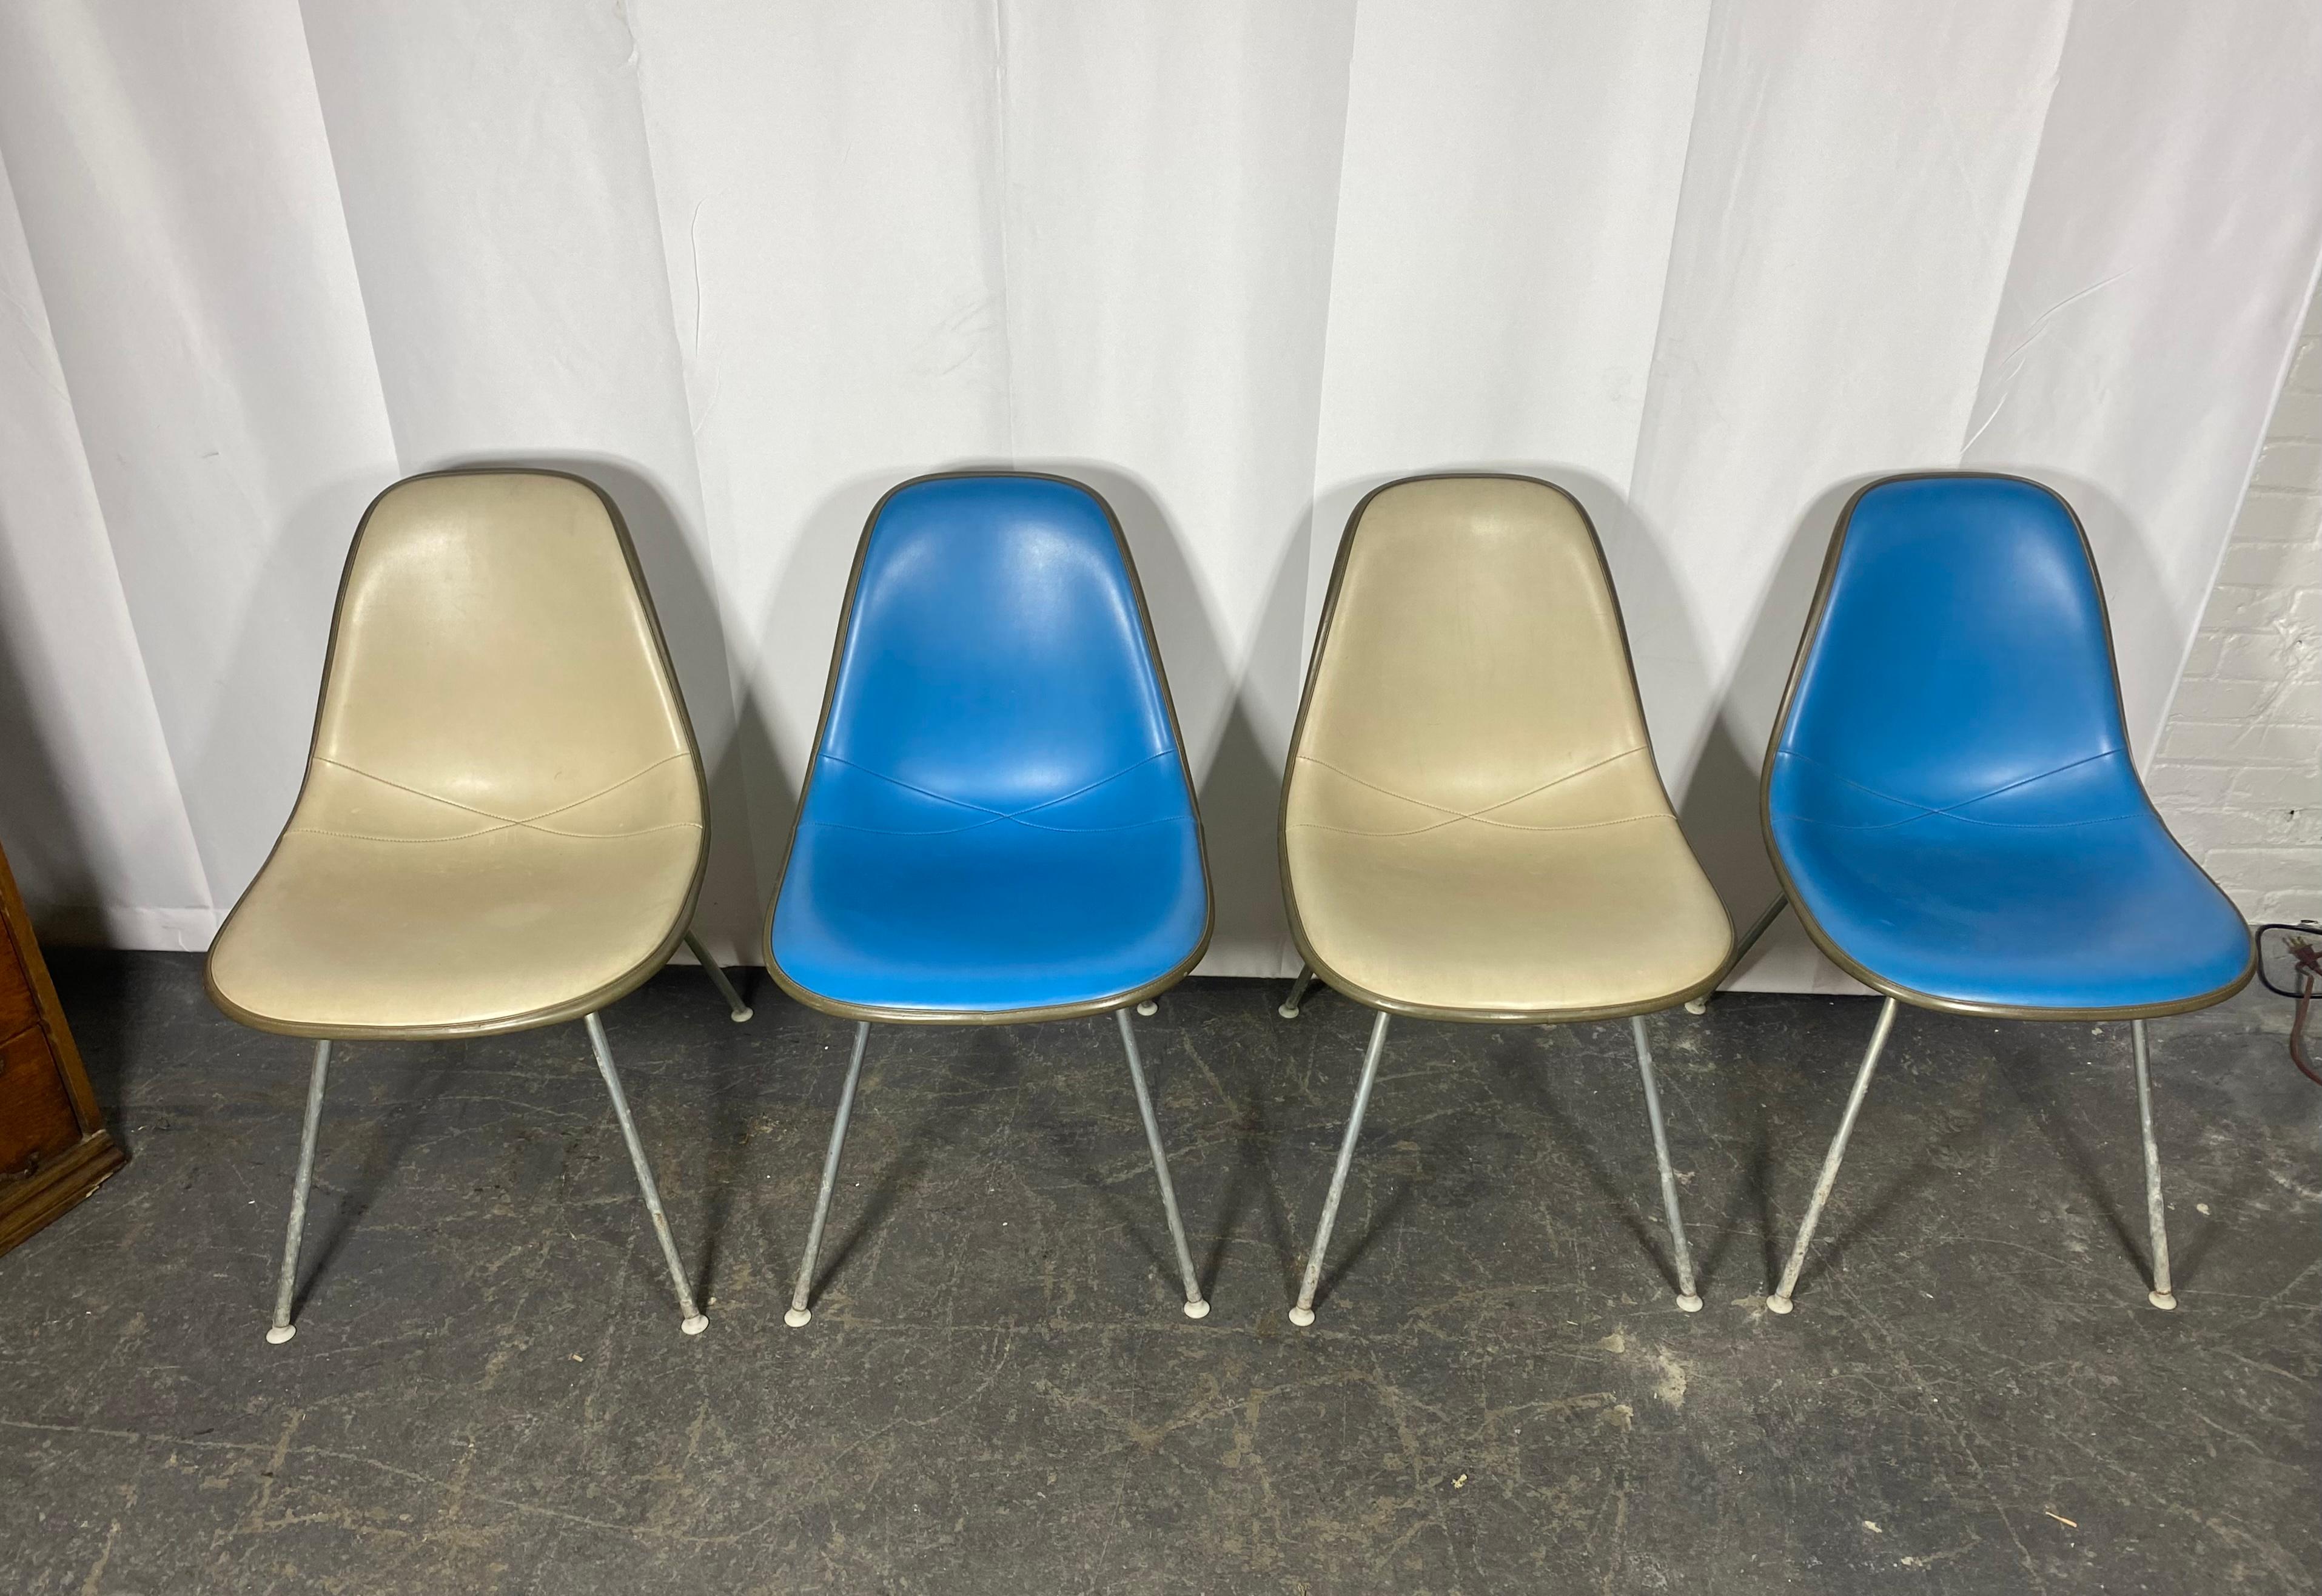 Mid-20th Century Charles Eames for Herman Miller Padded Shell Chairs (scoop chair)